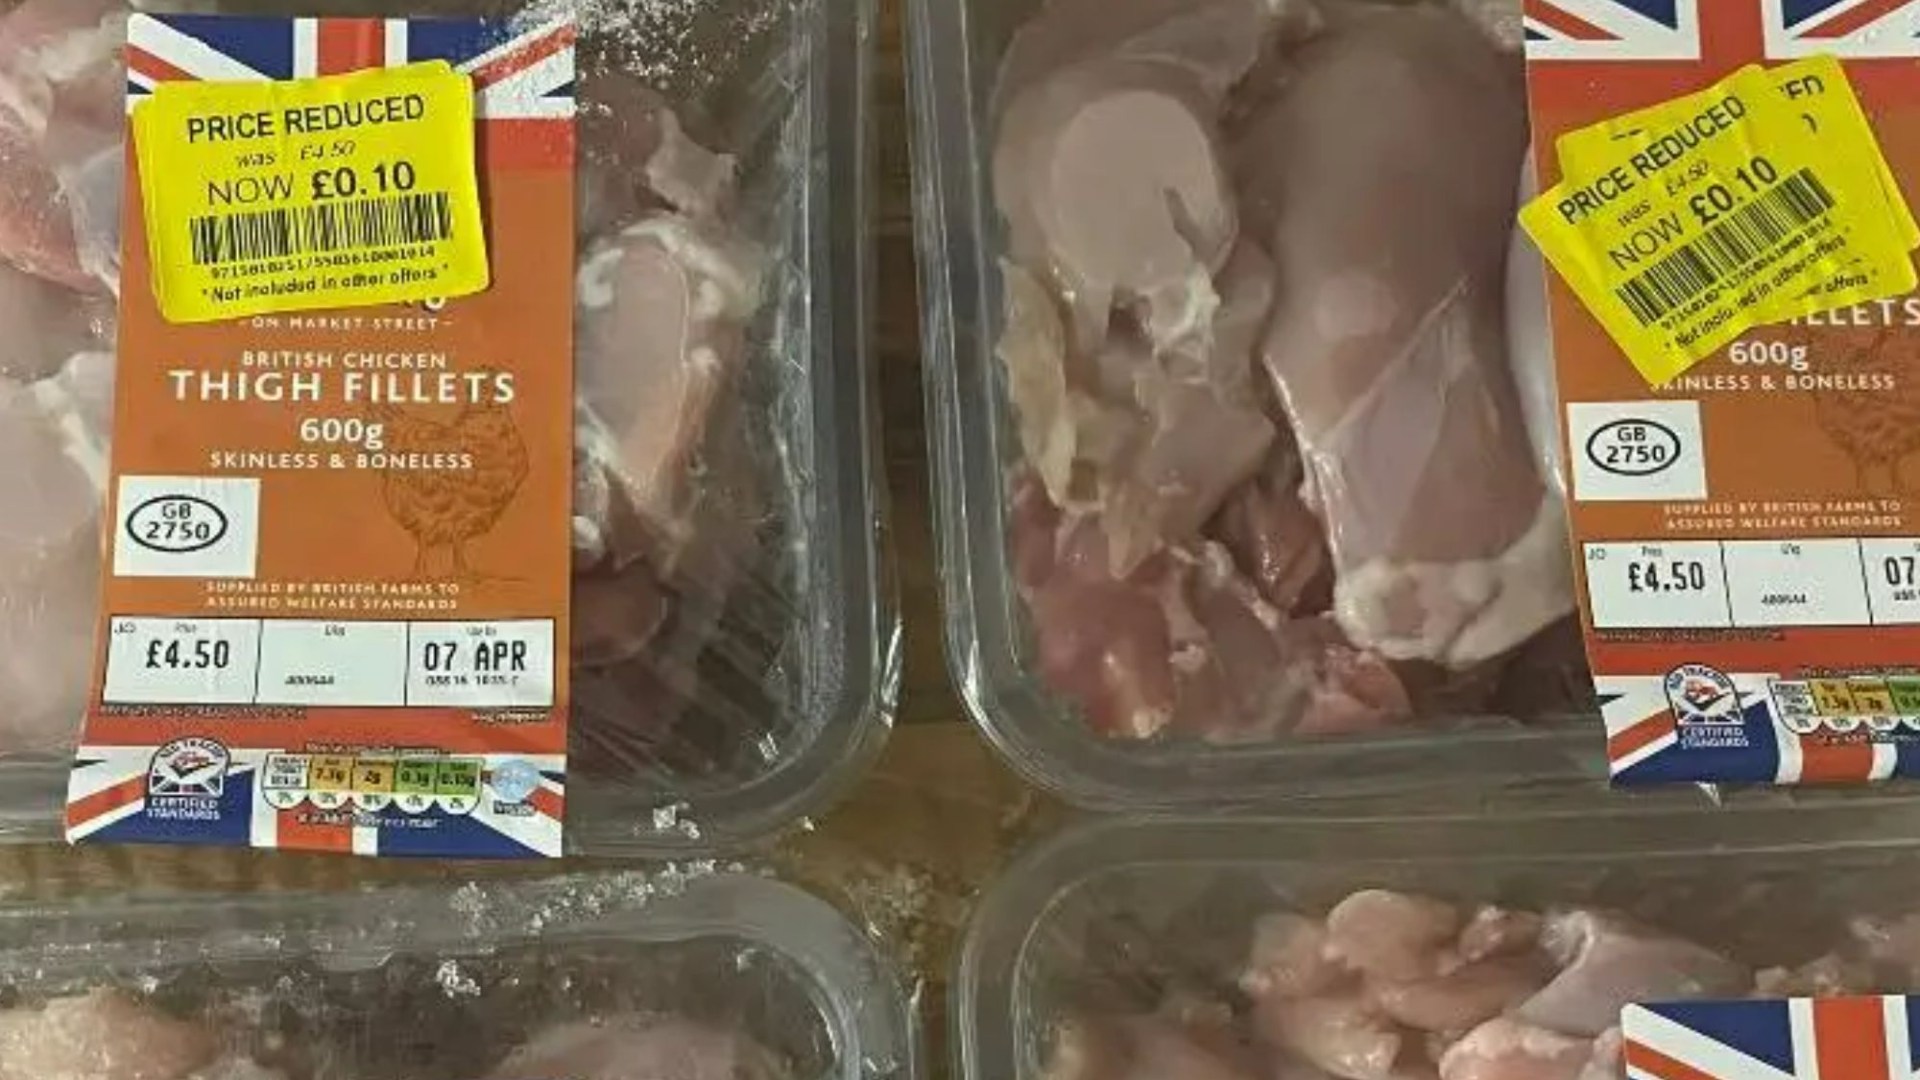 Never get prices this low shoppers beam as they rush to popular supermarket for meat that’s been slashed to just 10p [Video]